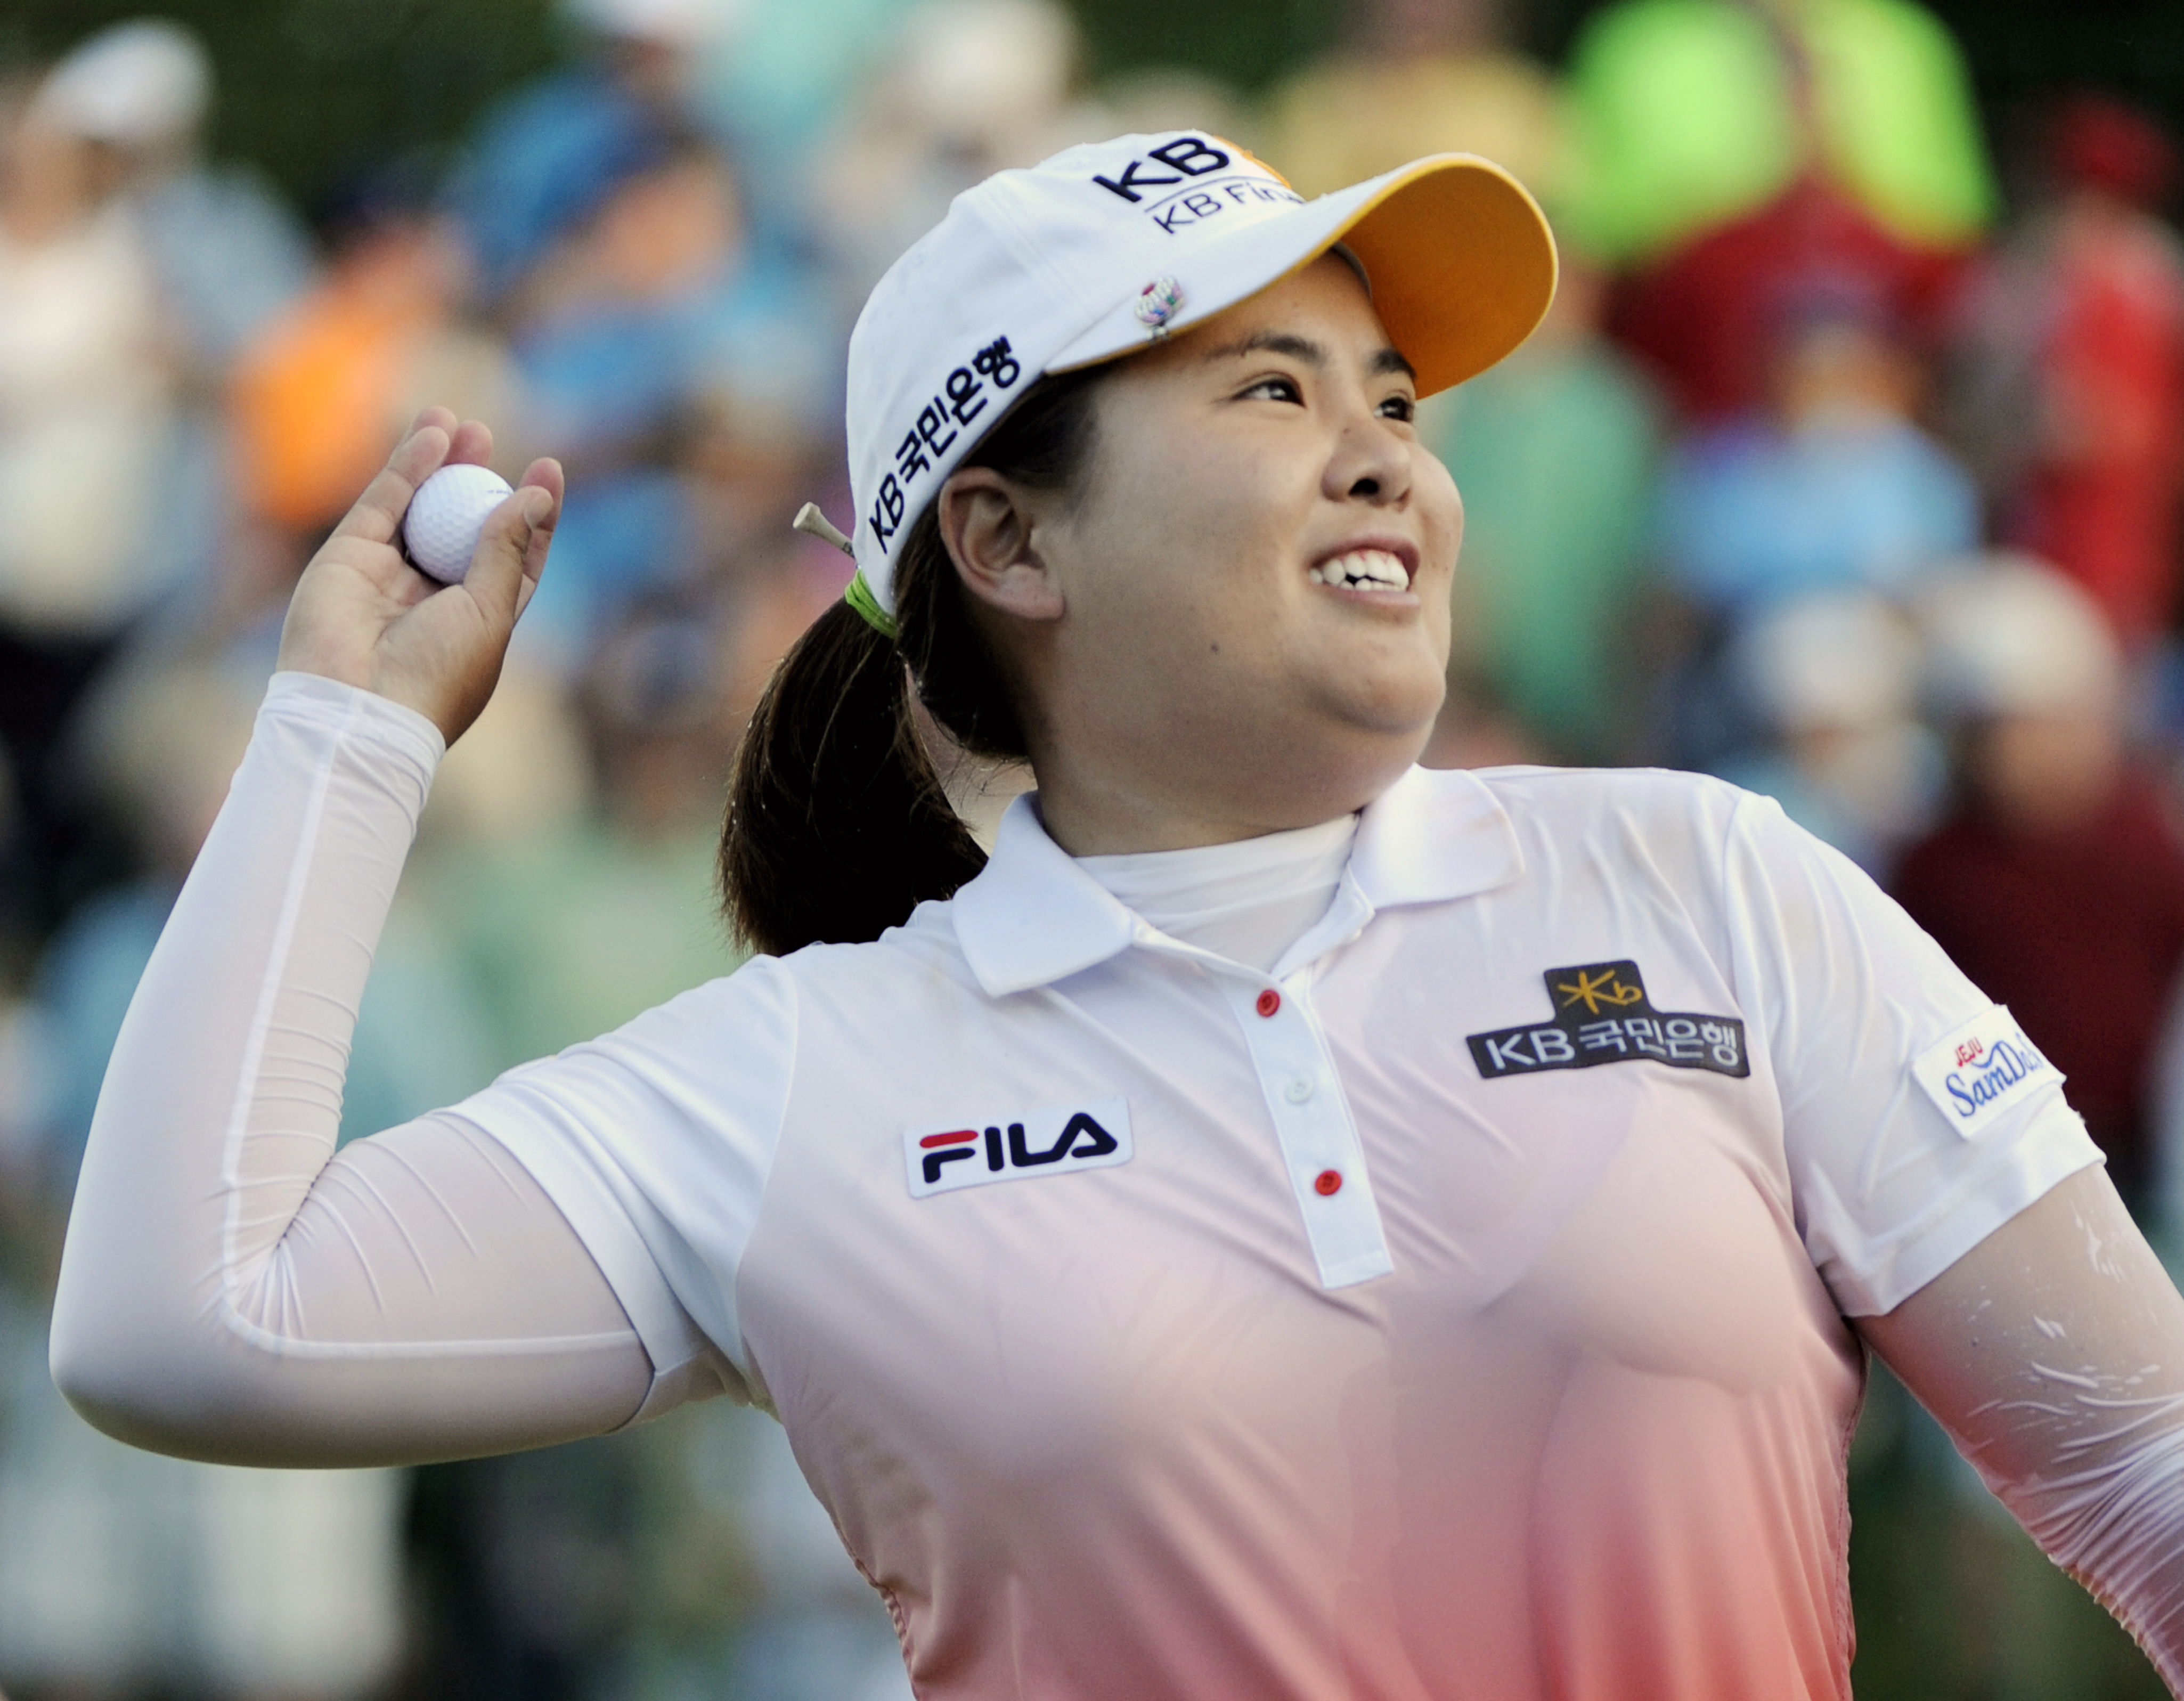 South Korean golfer Inbee Park can complete the career super grand slam with a win at the 2015 Evian Championship. (AP Photo/Gary Wiepert)